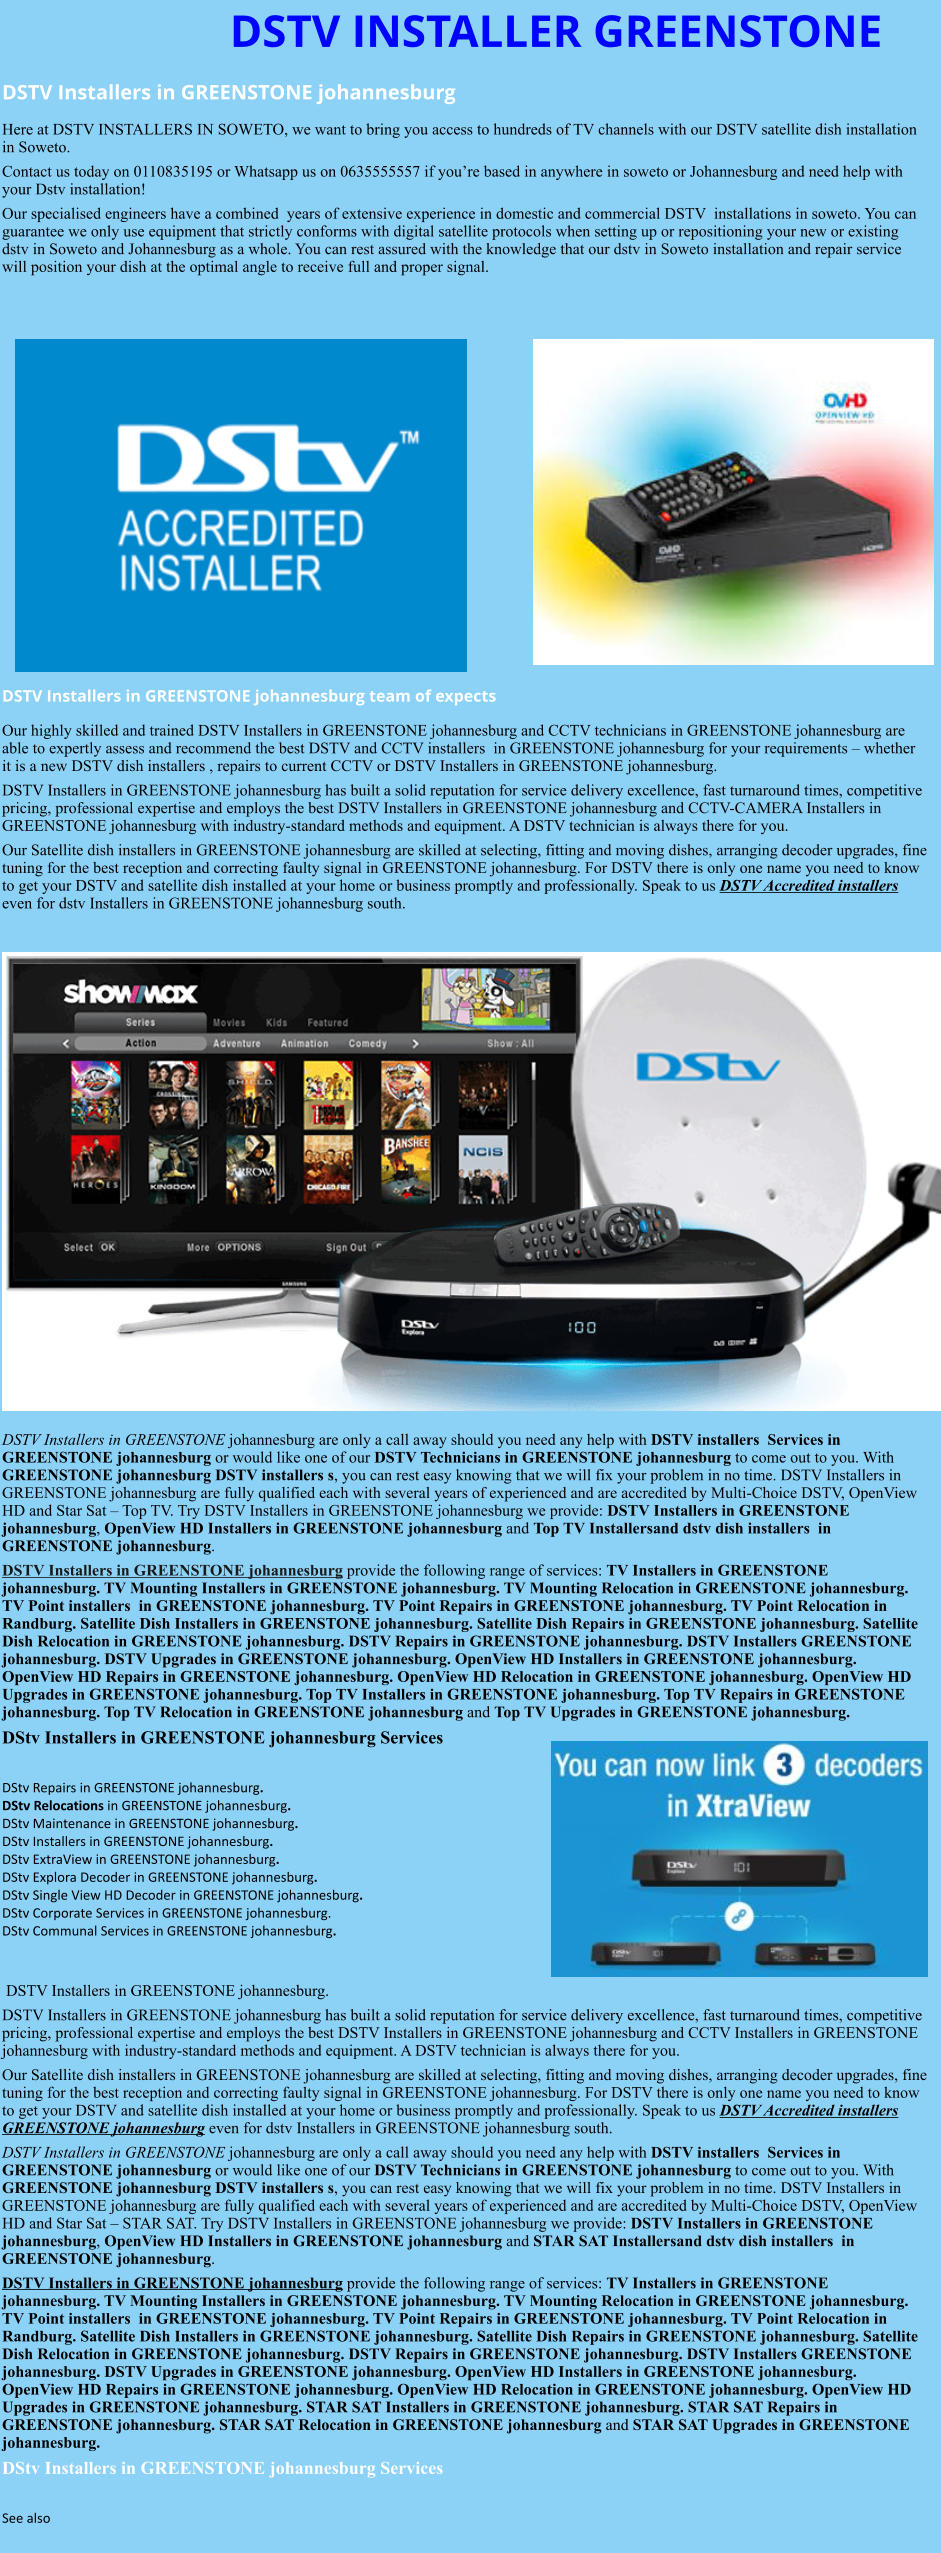 DSTV INSTALLER GREENSTONE DSTV Installers in GREENSTONE johannesburg  Here at DSTV INSTALLERS IN SOWETO, we want to bring you access to hundreds of TV channels with our DSTV satellite dish installation in Soweto. Contact us today on 0110835195 or Whatsapp us on 0635555557 if you’re based in anywhere in soweto or Johannesburg and need help with your Dstv installation! Our specialised engineers have a combined  years of extensive experience in domestic and commercial DSTV  installations in soweto. You can guarantee we only use equipment that strictly conforms with digital satellite protocols when setting up or repositioning your new or existing dstv in Soweto and Johannesburg as a whole. You can rest assured with the knowledge that our dstv in Soweto installation and repair service will position your dish at the optimal angle to receive full and proper signal.                 DSTV Installers in GREENSTONE johannesburg team of expects Our highly skilled and trained DSTV Installers in GREENSTONE johannesburg and CCTV technicians in GREENSTONE johannesburg are able to expertly assess and recommend the best DSTV and CCTV installers  in GREENSTONE johannesburg for your requirements – whether it is a new DSTV dish installers , repairs to current CCTV or DSTV Installers in GREENSTONE johannesburg. DSTV Installers in GREENSTONE johannesburg has built a solid reputation for service delivery excellence, fast turnaround times, competitive pricing, professional expertise and employs the best DSTV Installers in GREENSTONE johannesburg and CCTV-CAMERA Installers in GREENSTONE johannesburg with industry-standard methods and equipment. A DSTV technician is always there for you. Our Satellite dish installers in GREENSTONE johannesburg are skilled at selecting, fitting and moving dishes, arranging decoder upgrades, fine tuning for the best reception and correcting faulty signal in GREENSTONE johannesburg. For DSTV there is only one name you need to know to get your DSTV and satellite dish installed at your home or business promptly and professionally. Speak to us DSTV Accredited installers even for dstv Installers in GREENSTONE johannesburg south.                      DSTV Installers in GREENSTONE johannesburg are only a call away should you need any help with DSTV installers  Services in GREENSTONE johannesburg or would like one of our DSTV Technicians in GREENSTONE johannesburg to come out to you. With GREENSTONE johannesburg DSTV installers s, you can rest easy knowing that we will fix your problem in no time. DSTV Installers in GREENSTONE johannesburg are fully qualified each with several years of experienced and are accredited by Multi-Choice DSTV, OpenView HD and Star Sat – Top TV. Try DSTV Installers in GREENSTONE johannesburg we provide: DSTV Installers in GREENSTONE johannesburg, OpenView HD Installers in GREENSTONE johannesburg and Top TV Installersand dstv dish installers  in GREENSTONE johannesburg. DSTV Installers in GREENSTONE johannesburg provide the following range of services: TV Installers in GREENSTONE johannesburg. TV Mounting Installers in GREENSTONE johannesburg. TV Mounting Relocation in GREENSTONE johannesburg. TV Point installers  in GREENSTONE johannesburg. TV Point Repairs in GREENSTONE johannesburg. TV Point Relocation in Randburg. Satellite Dish Installers in GREENSTONE johannesburg. Satellite Dish Repairs in GREENSTONE johannesburg. Satellite Dish Relocation in GREENSTONE johannesburg. DSTV Repairs in GREENSTONE johannesburg. DSTV Installers GREENSTONE johannesburg. DSTV Upgrades in GREENSTONE johannesburg. OpenView HD Installers in GREENSTONE johannesburg. OpenView HD Repairs in GREENSTONE johannesburg. OpenView HD Relocation in GREENSTONE johannesburg. OpenView HD Upgrades in GREENSTONE johannesburg. Top TV Installers in GREENSTONE johannesburg. Top TV Repairs in GREENSTONE johannesburg. Top TV Relocation in GREENSTONE johannesburg and Top TV Upgrades in GREENSTONE johannesburg. DStv Installers in GREENSTONE johannesburg Services  DStv Repairs in GREENSTONE johannesburg.  DStv Relocations in GREENSTONE johannesburg.  DStv Maintenance in GREENSTONE johannesburg. DStv Installers in GREENSTONE johannesburg. DStv ExtraView in GREENSTONE johannesburg. DStv Explora Decoder in GREENSTONE johannesburg. DStv Single View HD Decoder in GREENSTONE johannesburg. DStv Corporate Services in GREENSTONE johannesburg. DStv Communal Services in GREENSTONE johannesburg.    DSTV Installers in GREENSTONE johannesburg. DSTV Installers in GREENSTONE johannesburg has built a solid reputation for service delivery excellence, fast turnaround times, competitive pricing, professional expertise and employs the best DSTV Installers in GREENSTONE johannesburg and CCTV Installers in GREENSTONE johannesburg with industry-standard methods and equipment. A DSTV technician is always there for you. Our Satellite dish installers in GREENSTONE johannesburg are skilled at selecting, fitting and moving dishes, arranging decoder upgrades, fine tuning for the best reception and correcting faulty signal in GREENSTONE johannesburg. For DSTV there is only one name you need to know to get your DSTV and satellite dish installed at your home or business promptly and professionally. Speak to us DSTV Accredited installers GREENSTONE johannesburg even for dstv Installers in GREENSTONE johannesburg south. DSTV Installers in GREENSTONE johannesburg are only a call away should you need any help with DSTV installers  Services in GREENSTONE johannesburg or would like one of our DSTV Technicians in GREENSTONE johannesburg to come out to you. With GREENSTONE johannesburg DSTV installers s, you can rest easy knowing that we will fix your problem in no time. DSTV Installers in GREENSTONE johannesburg are fully qualified each with several years of experienced and are accredited by Multi-Choice DSTV, OpenView HD and Star Sat – STAR SAT. Try DSTV Installers in GREENSTONE johannesburg we provide: DSTV Installers in GREENSTONE johannesburg, OpenView HD Installers in GREENSTONE johannesburg and STAR SAT Installersand dstv dish installers  in GREENSTONE johannesburg. DSTV Installers in GREENSTONE johannesburg provide the following range of services: TV Installers in GREENSTONE johannesburg. TV Mounting Installers in GREENSTONE johannesburg. TV Mounting Relocation in GREENSTONE johannesburg. TV Point installers  in GREENSTONE johannesburg. TV Point Repairs in GREENSTONE johannesburg. TV Point Relocation in Randburg. Satellite Dish Installers in GREENSTONE johannesburg. Satellite Dish Repairs in GREENSTONE johannesburg. Satellite Dish Relocation in GREENSTONE johannesburg. DSTV Repairs in GREENSTONE johannesburg. DSTV Installers GREENSTONE johannesburg. DSTV Upgrades in GREENSTONE johannesburg. OpenView HD Installers in GREENSTONE johannesburg. OpenView HD Repairs in GREENSTONE johannesburg. OpenView HD Relocation in GREENSTONE johannesburg. OpenView HD Upgrades in GREENSTONE johannesburg. STAR SAT Installers in GREENSTONE johannesburg. STAR SAT Repairs in GREENSTONE johannesburg. STAR SAT Relocation in GREENSTONE johannesburg and STAR SAT Upgrades in GREENSTONE johannesburg. DStv Installers in GREENSTONE johannesburg Services  See also